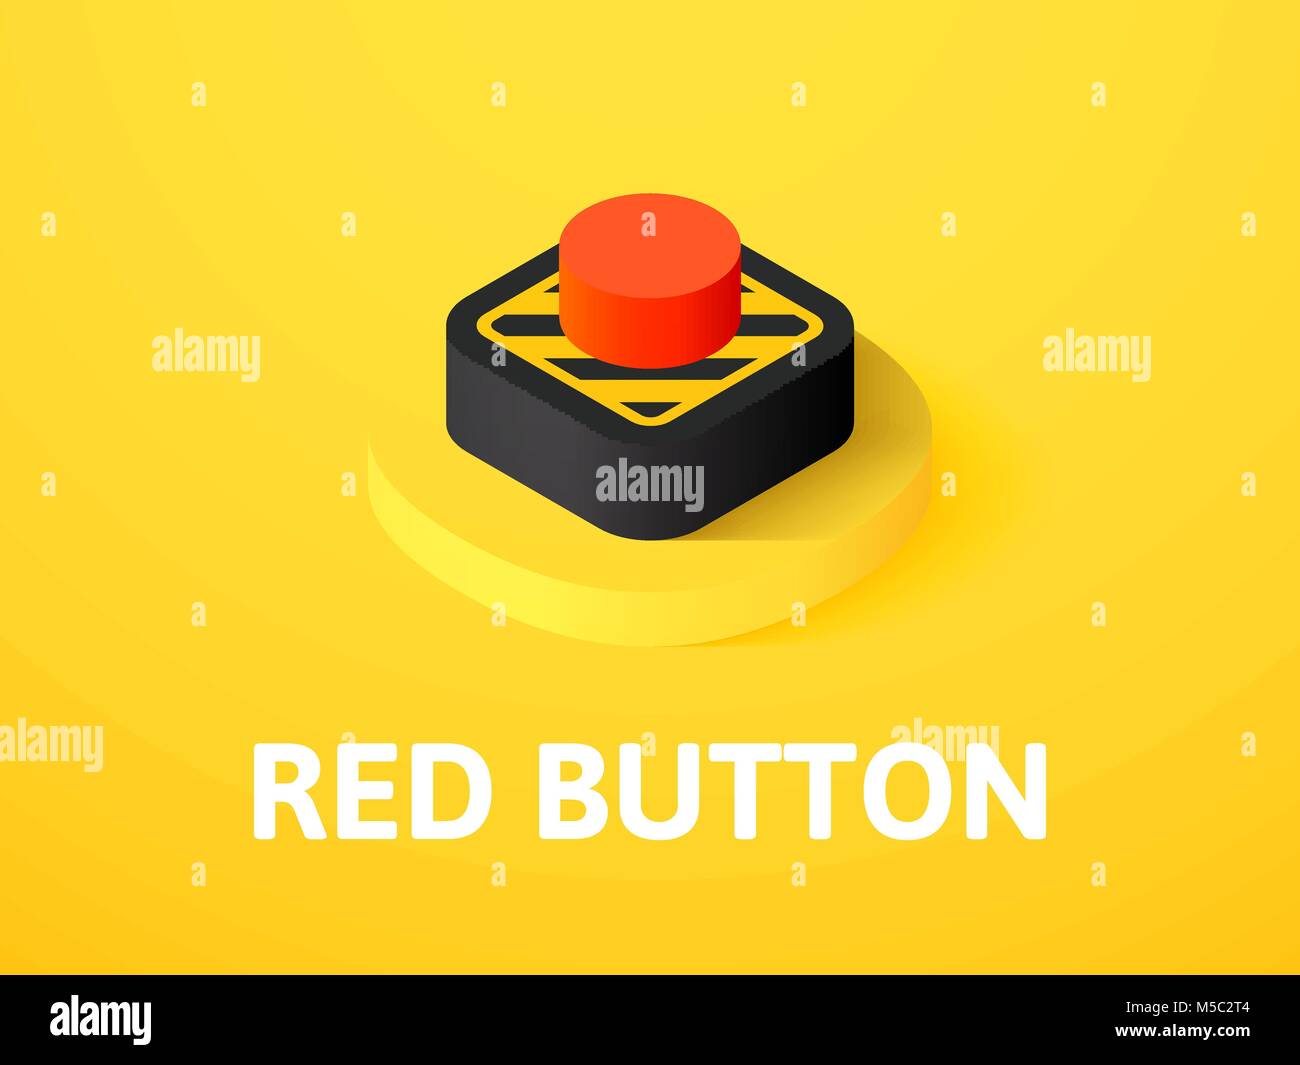 Red button isometric icon, isolated on color background Stock Vector